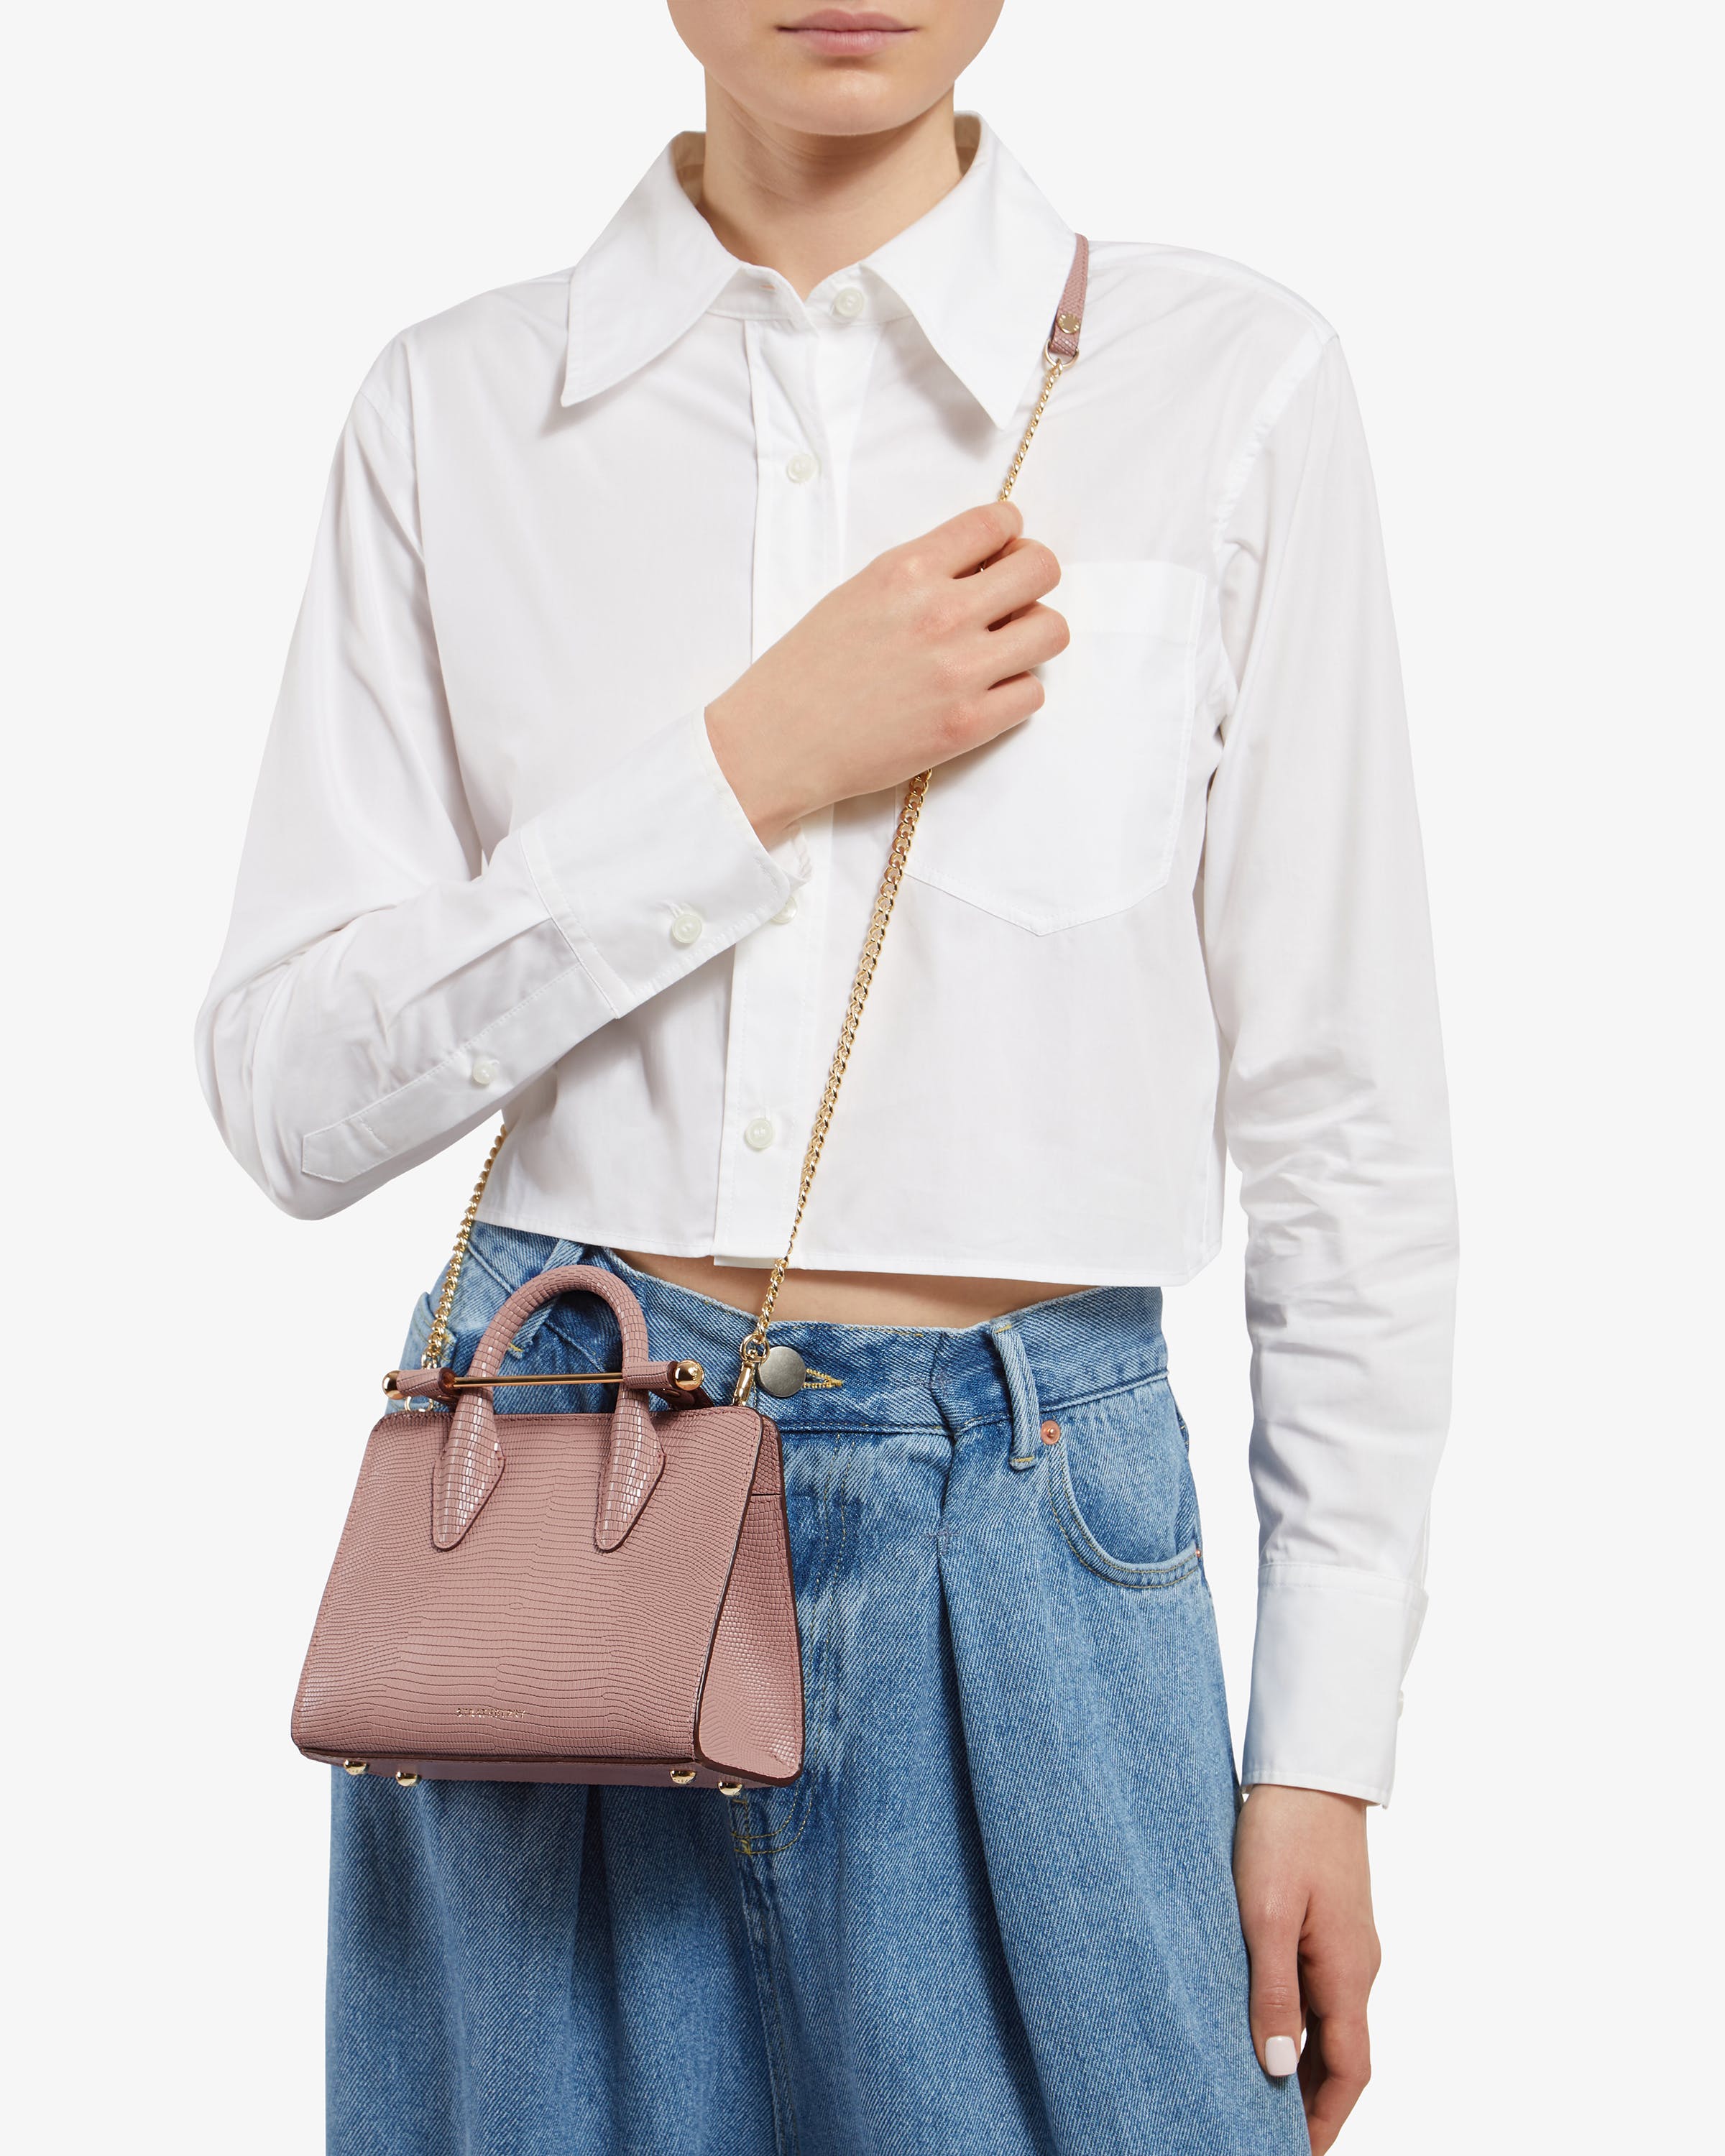 The Strathberry Nano Tote - Lizard-Embossed Leather Blush Rose